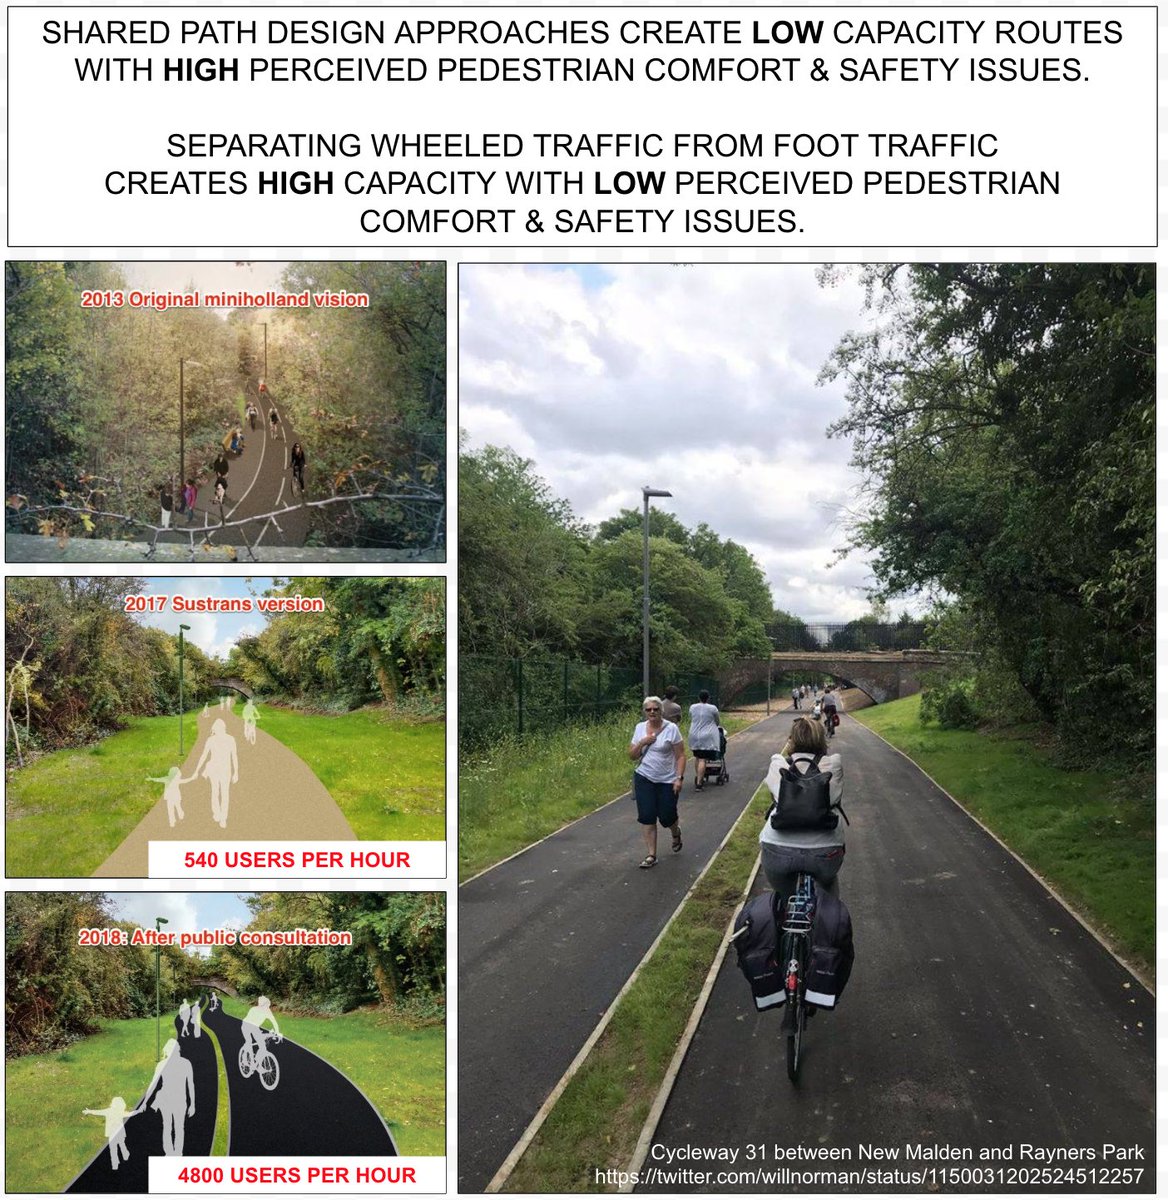 It's really odd to see @GreaterCambs pushing shared path design in urban areas (and even rural) which significantly limits the movement capacity and the comfort of pedestrian users.